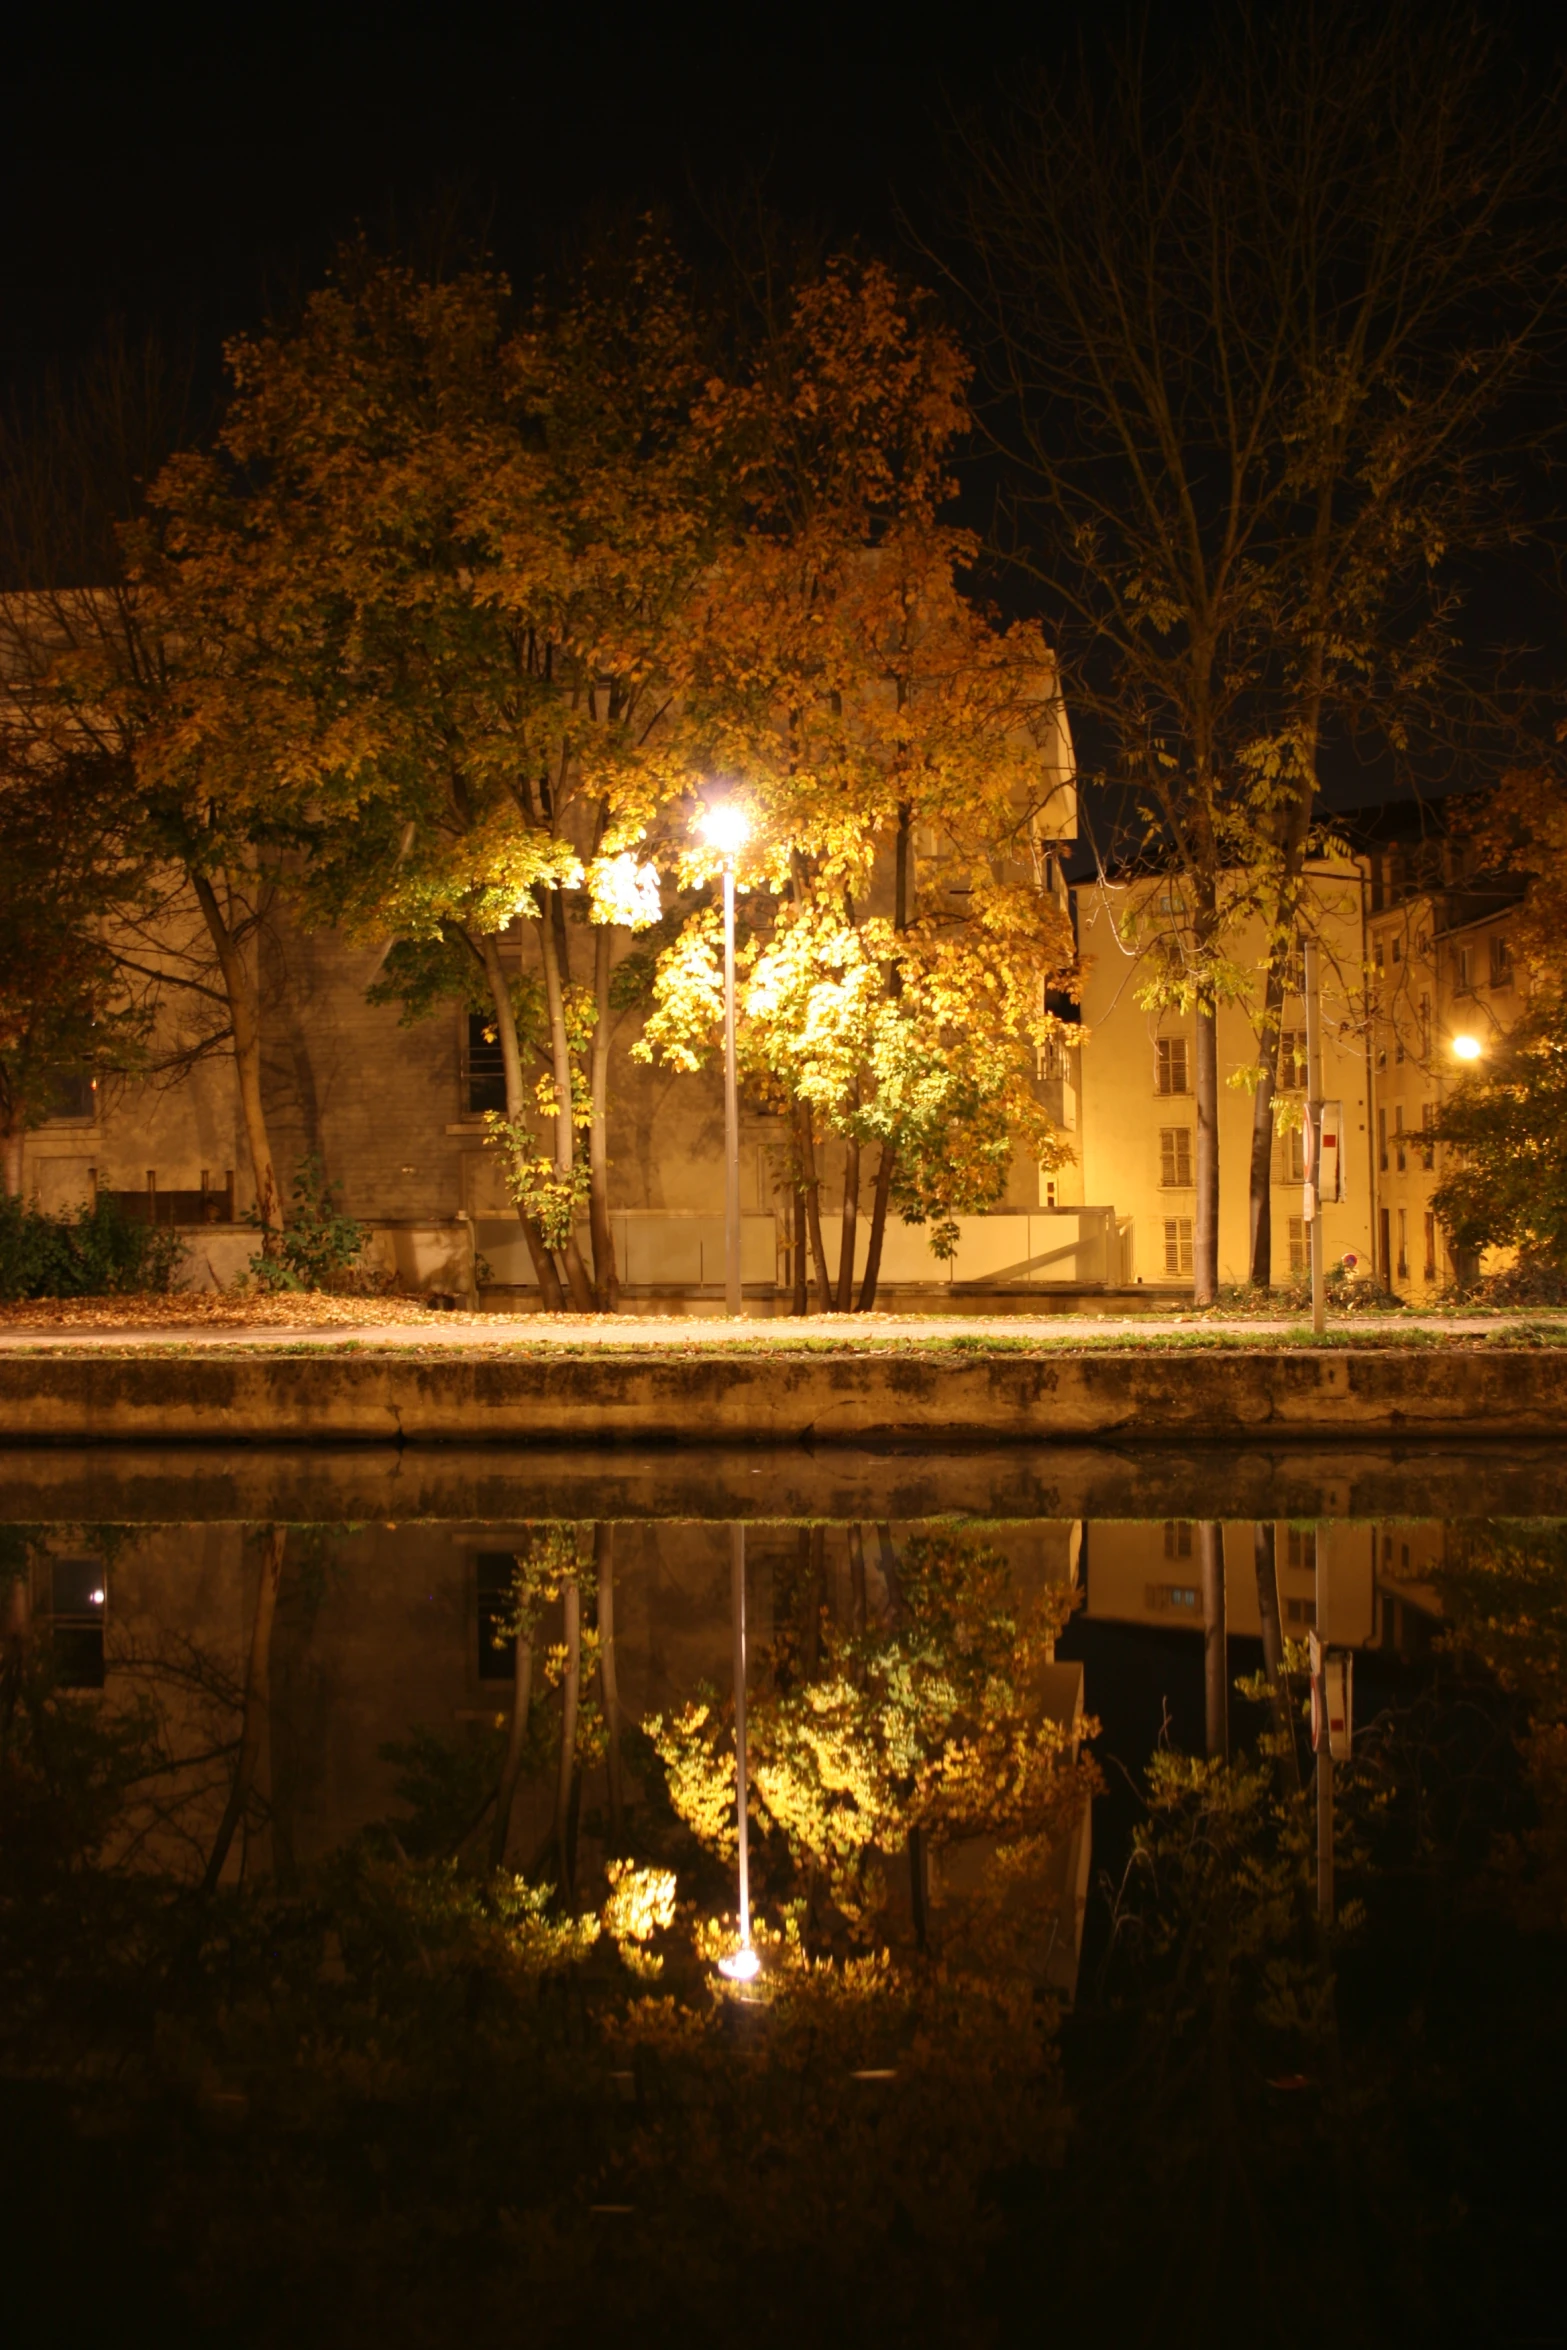 the trees are illuminated by street lamps reflecting in the water